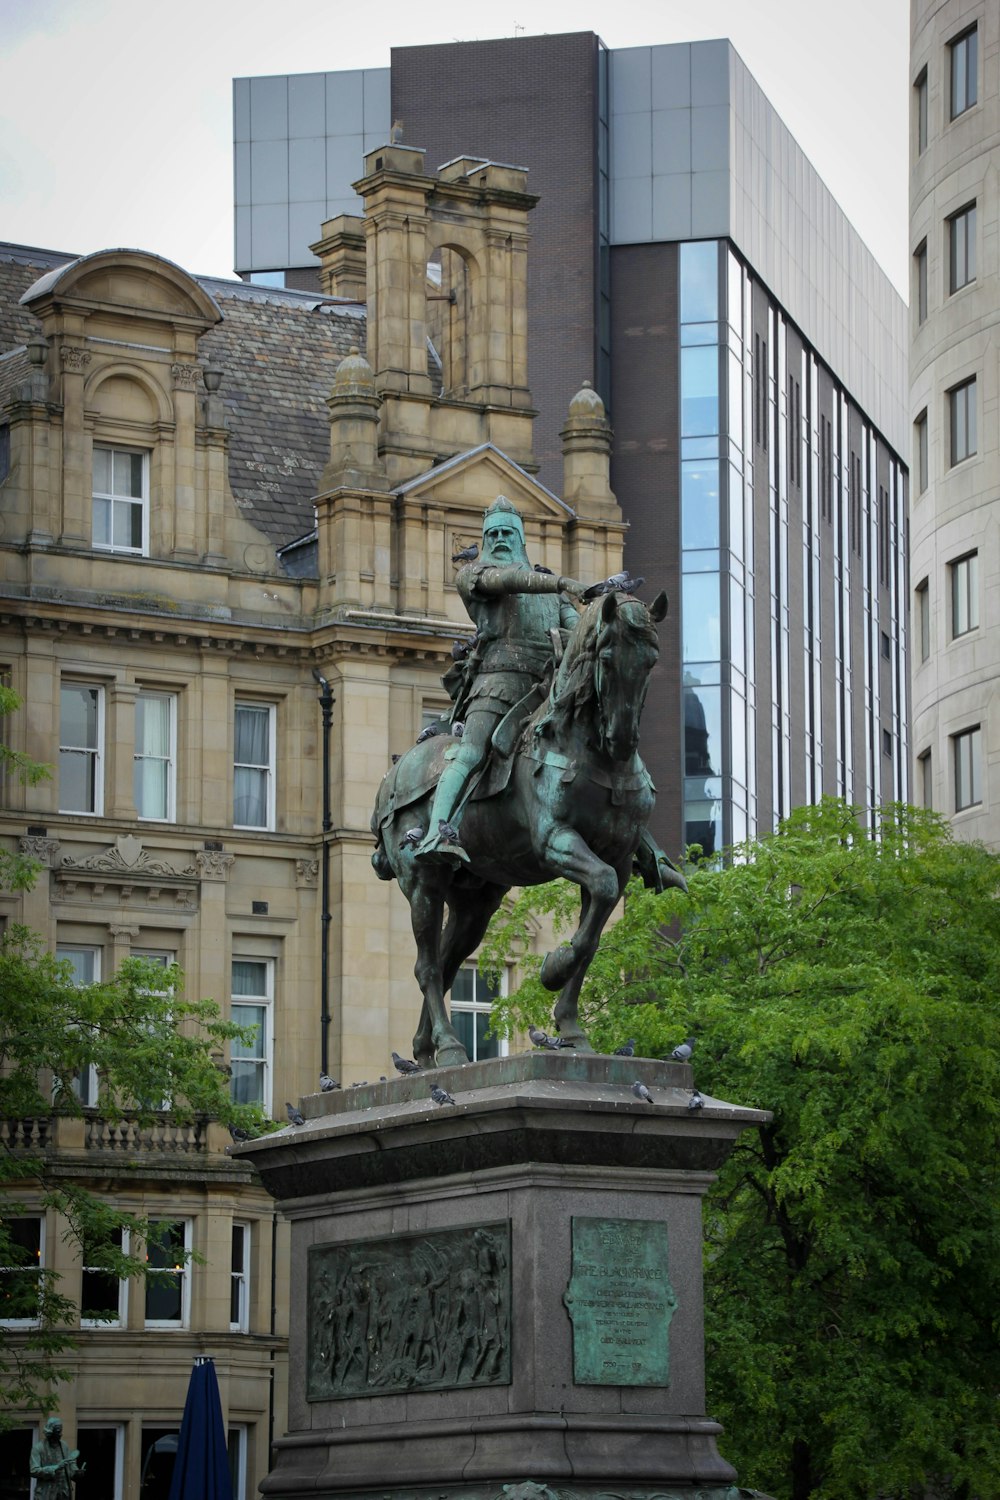 man riding horse statue near brown concrete building during daytime